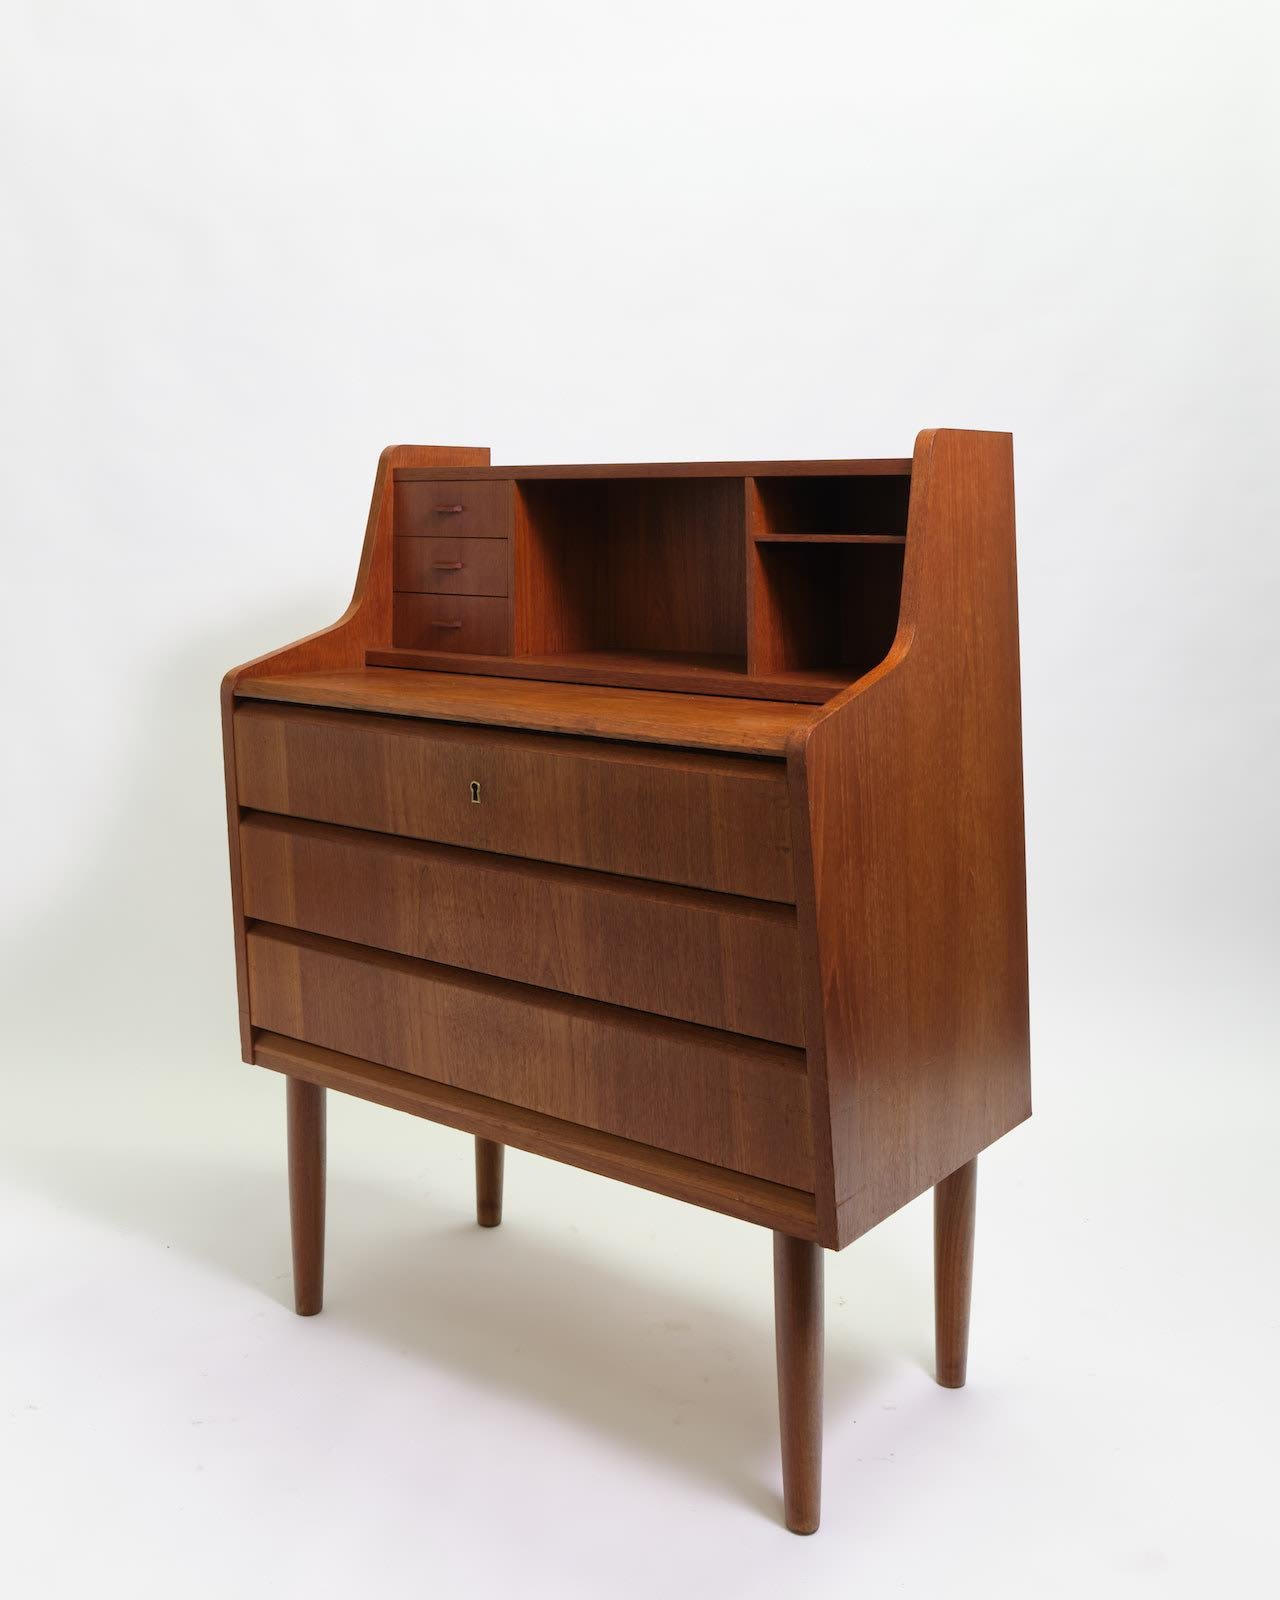 Mid-century teak bureau table circa 1960s/70s, with three small drawers and galley over three long drawers.

Dimensions: H100 x W80 x D45 cm.